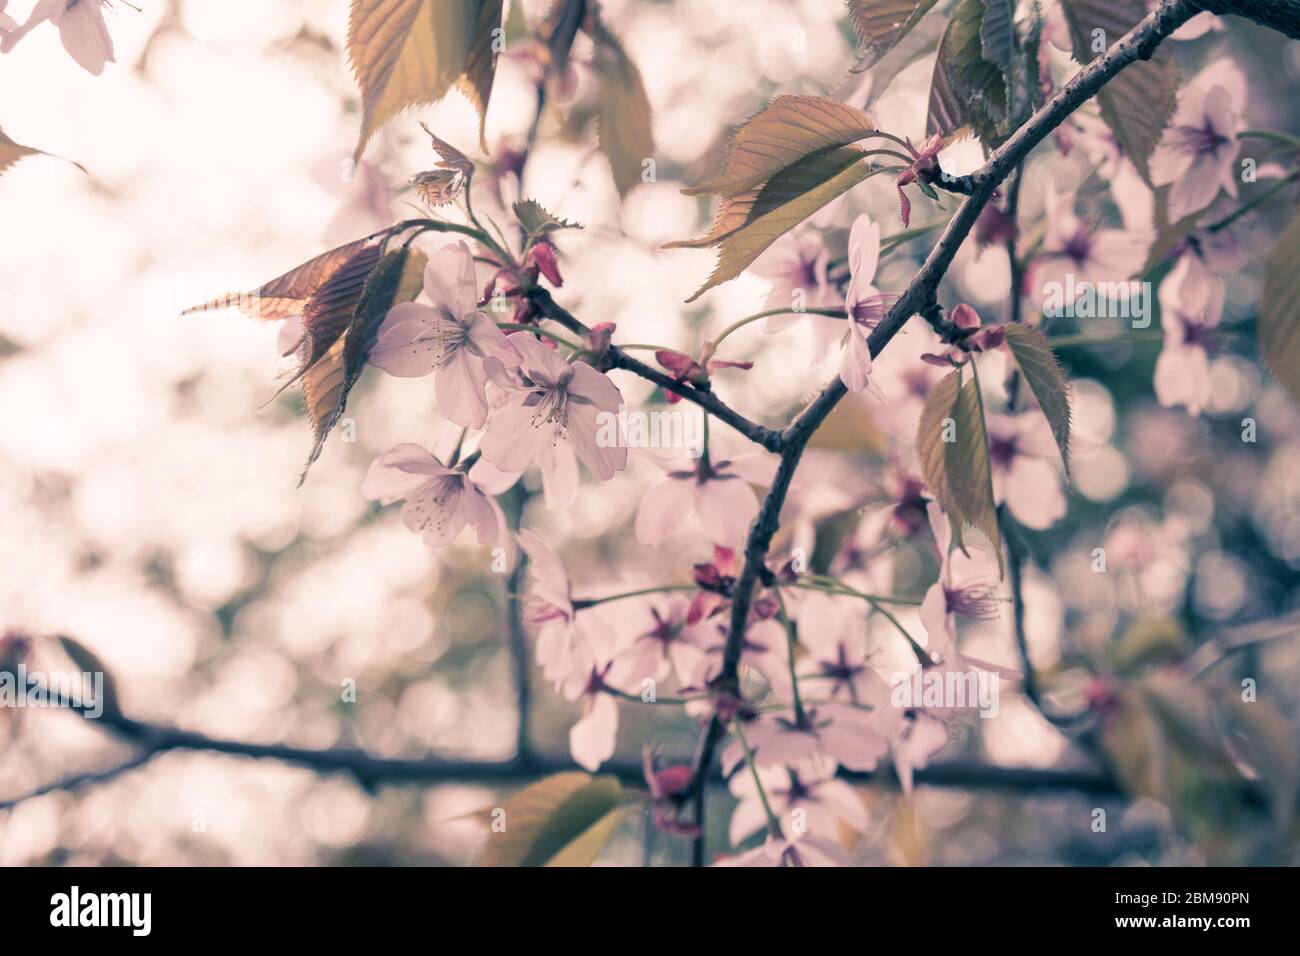 Beautiful and fresh spring backgrund with blurry light pink cherry blossom tree branches background Stock Photo